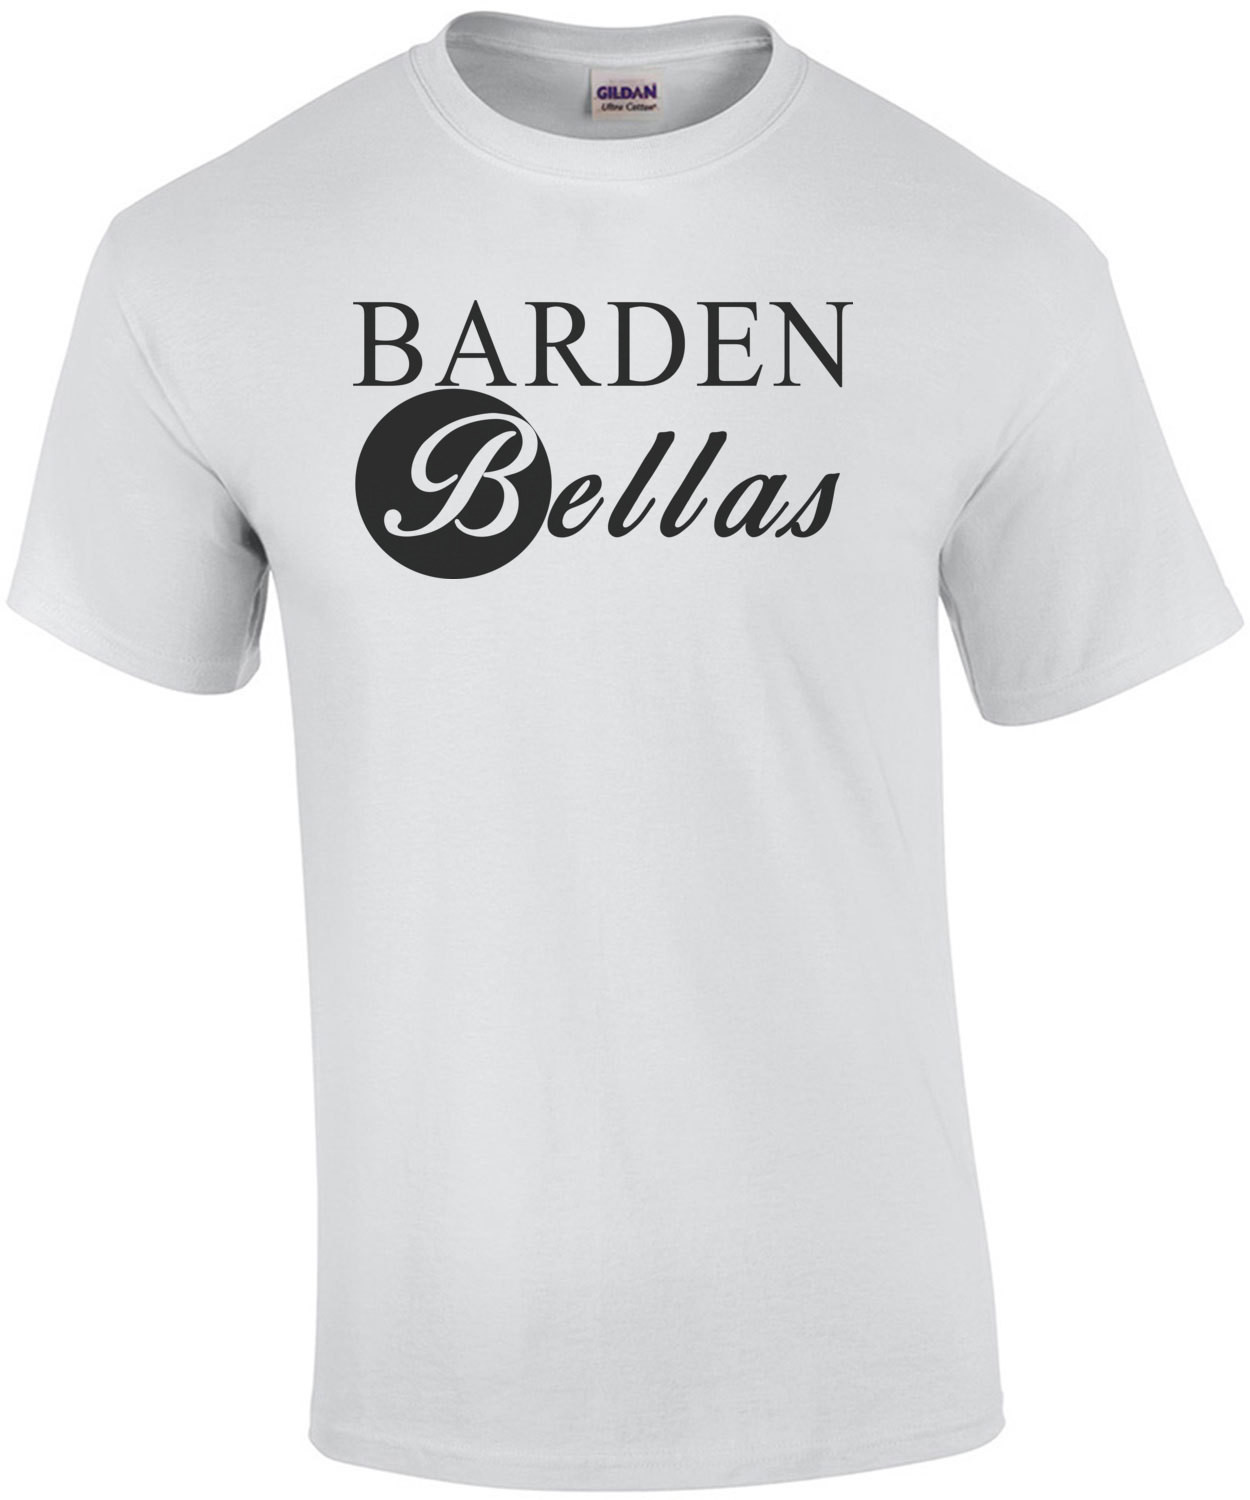 Barden Bellas - Pitch Perfect T-Shirt